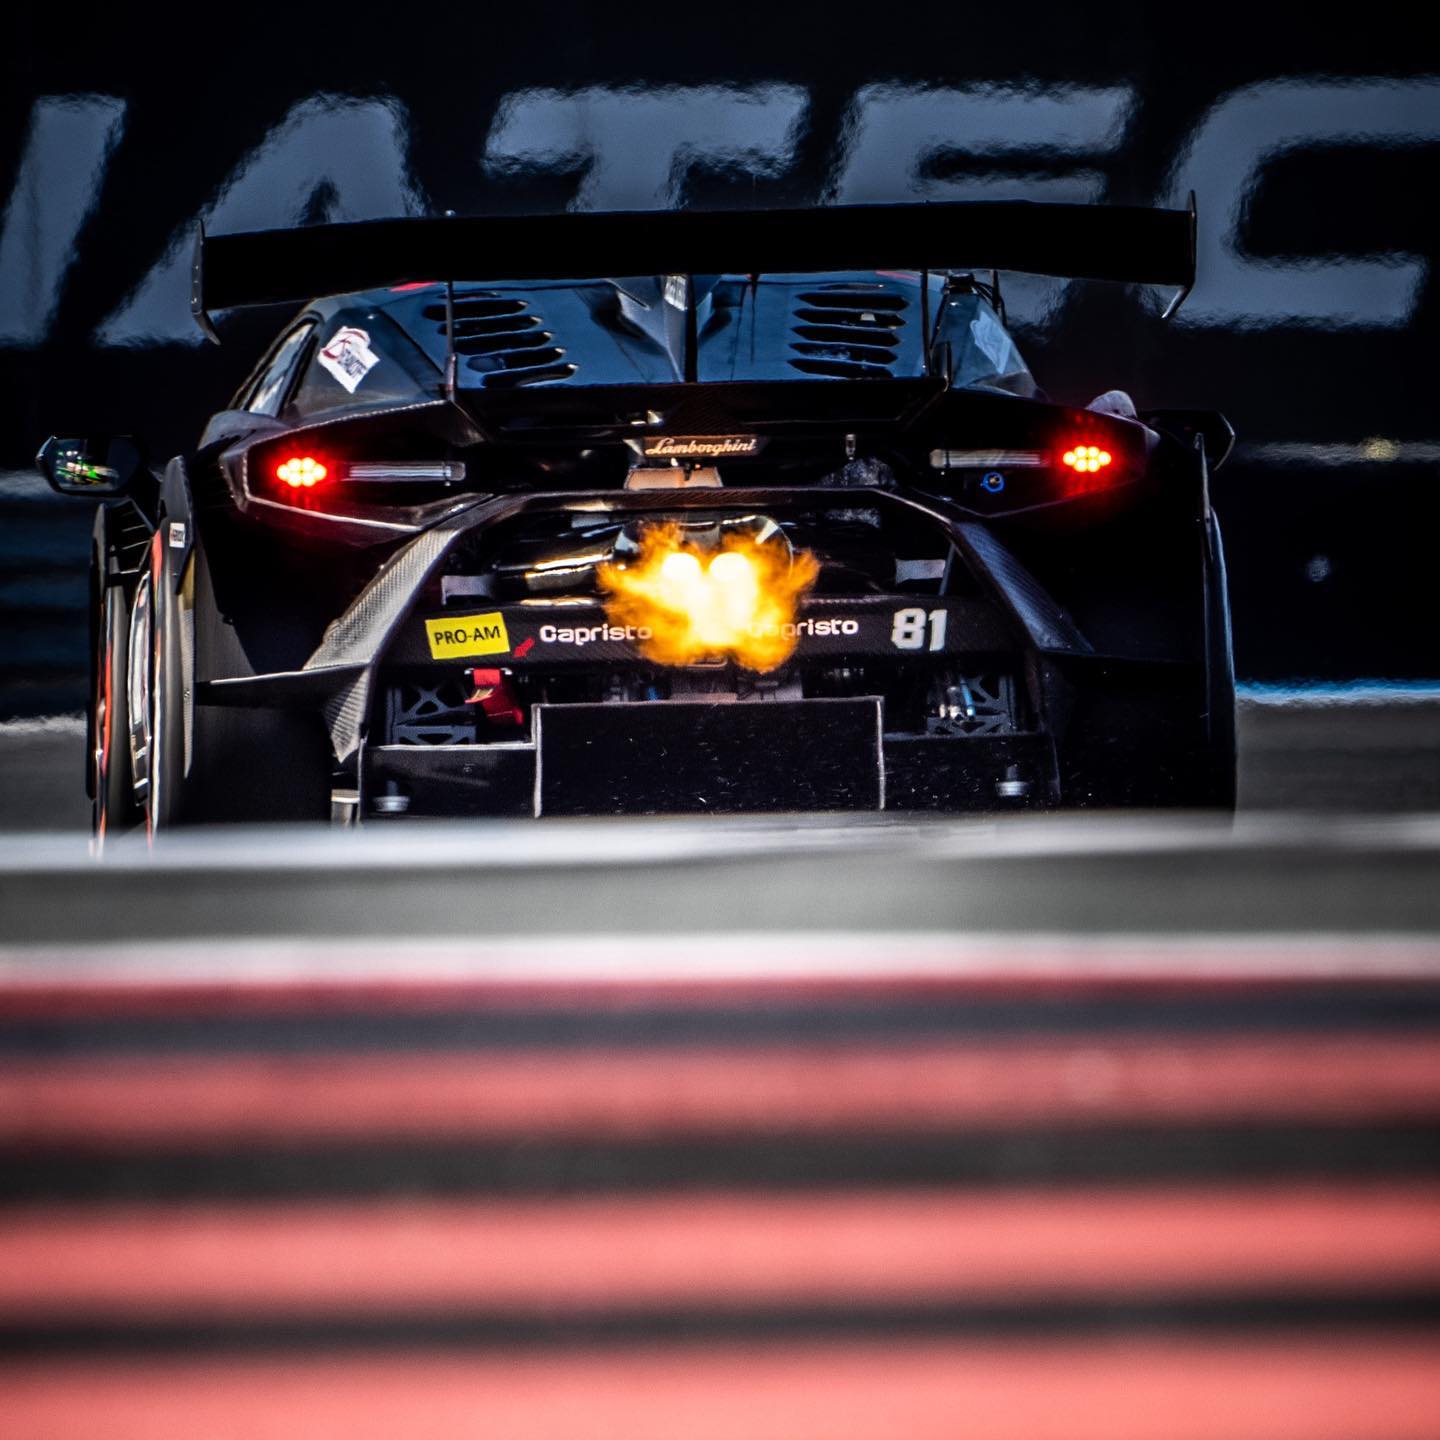 Target wins in the first round of the Lamborghini Super Trofeo at Paul Ricard